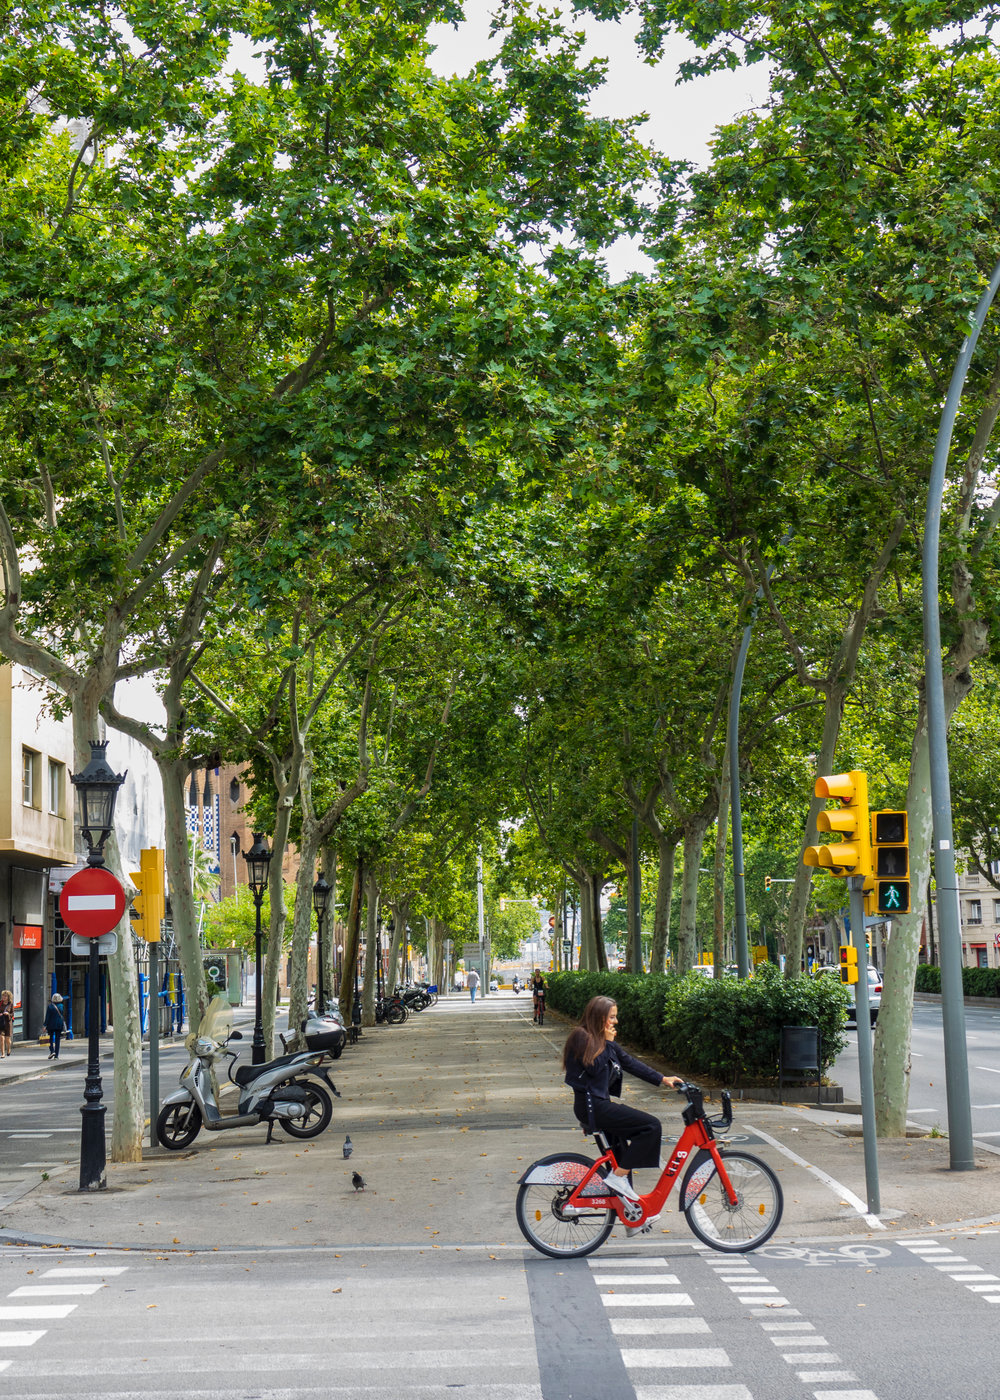  I don’t know why I like this photo so much, but it seems very “Barcelona”. People riding bikes, wide walking paths on calm city streets. It’s such a great city. 